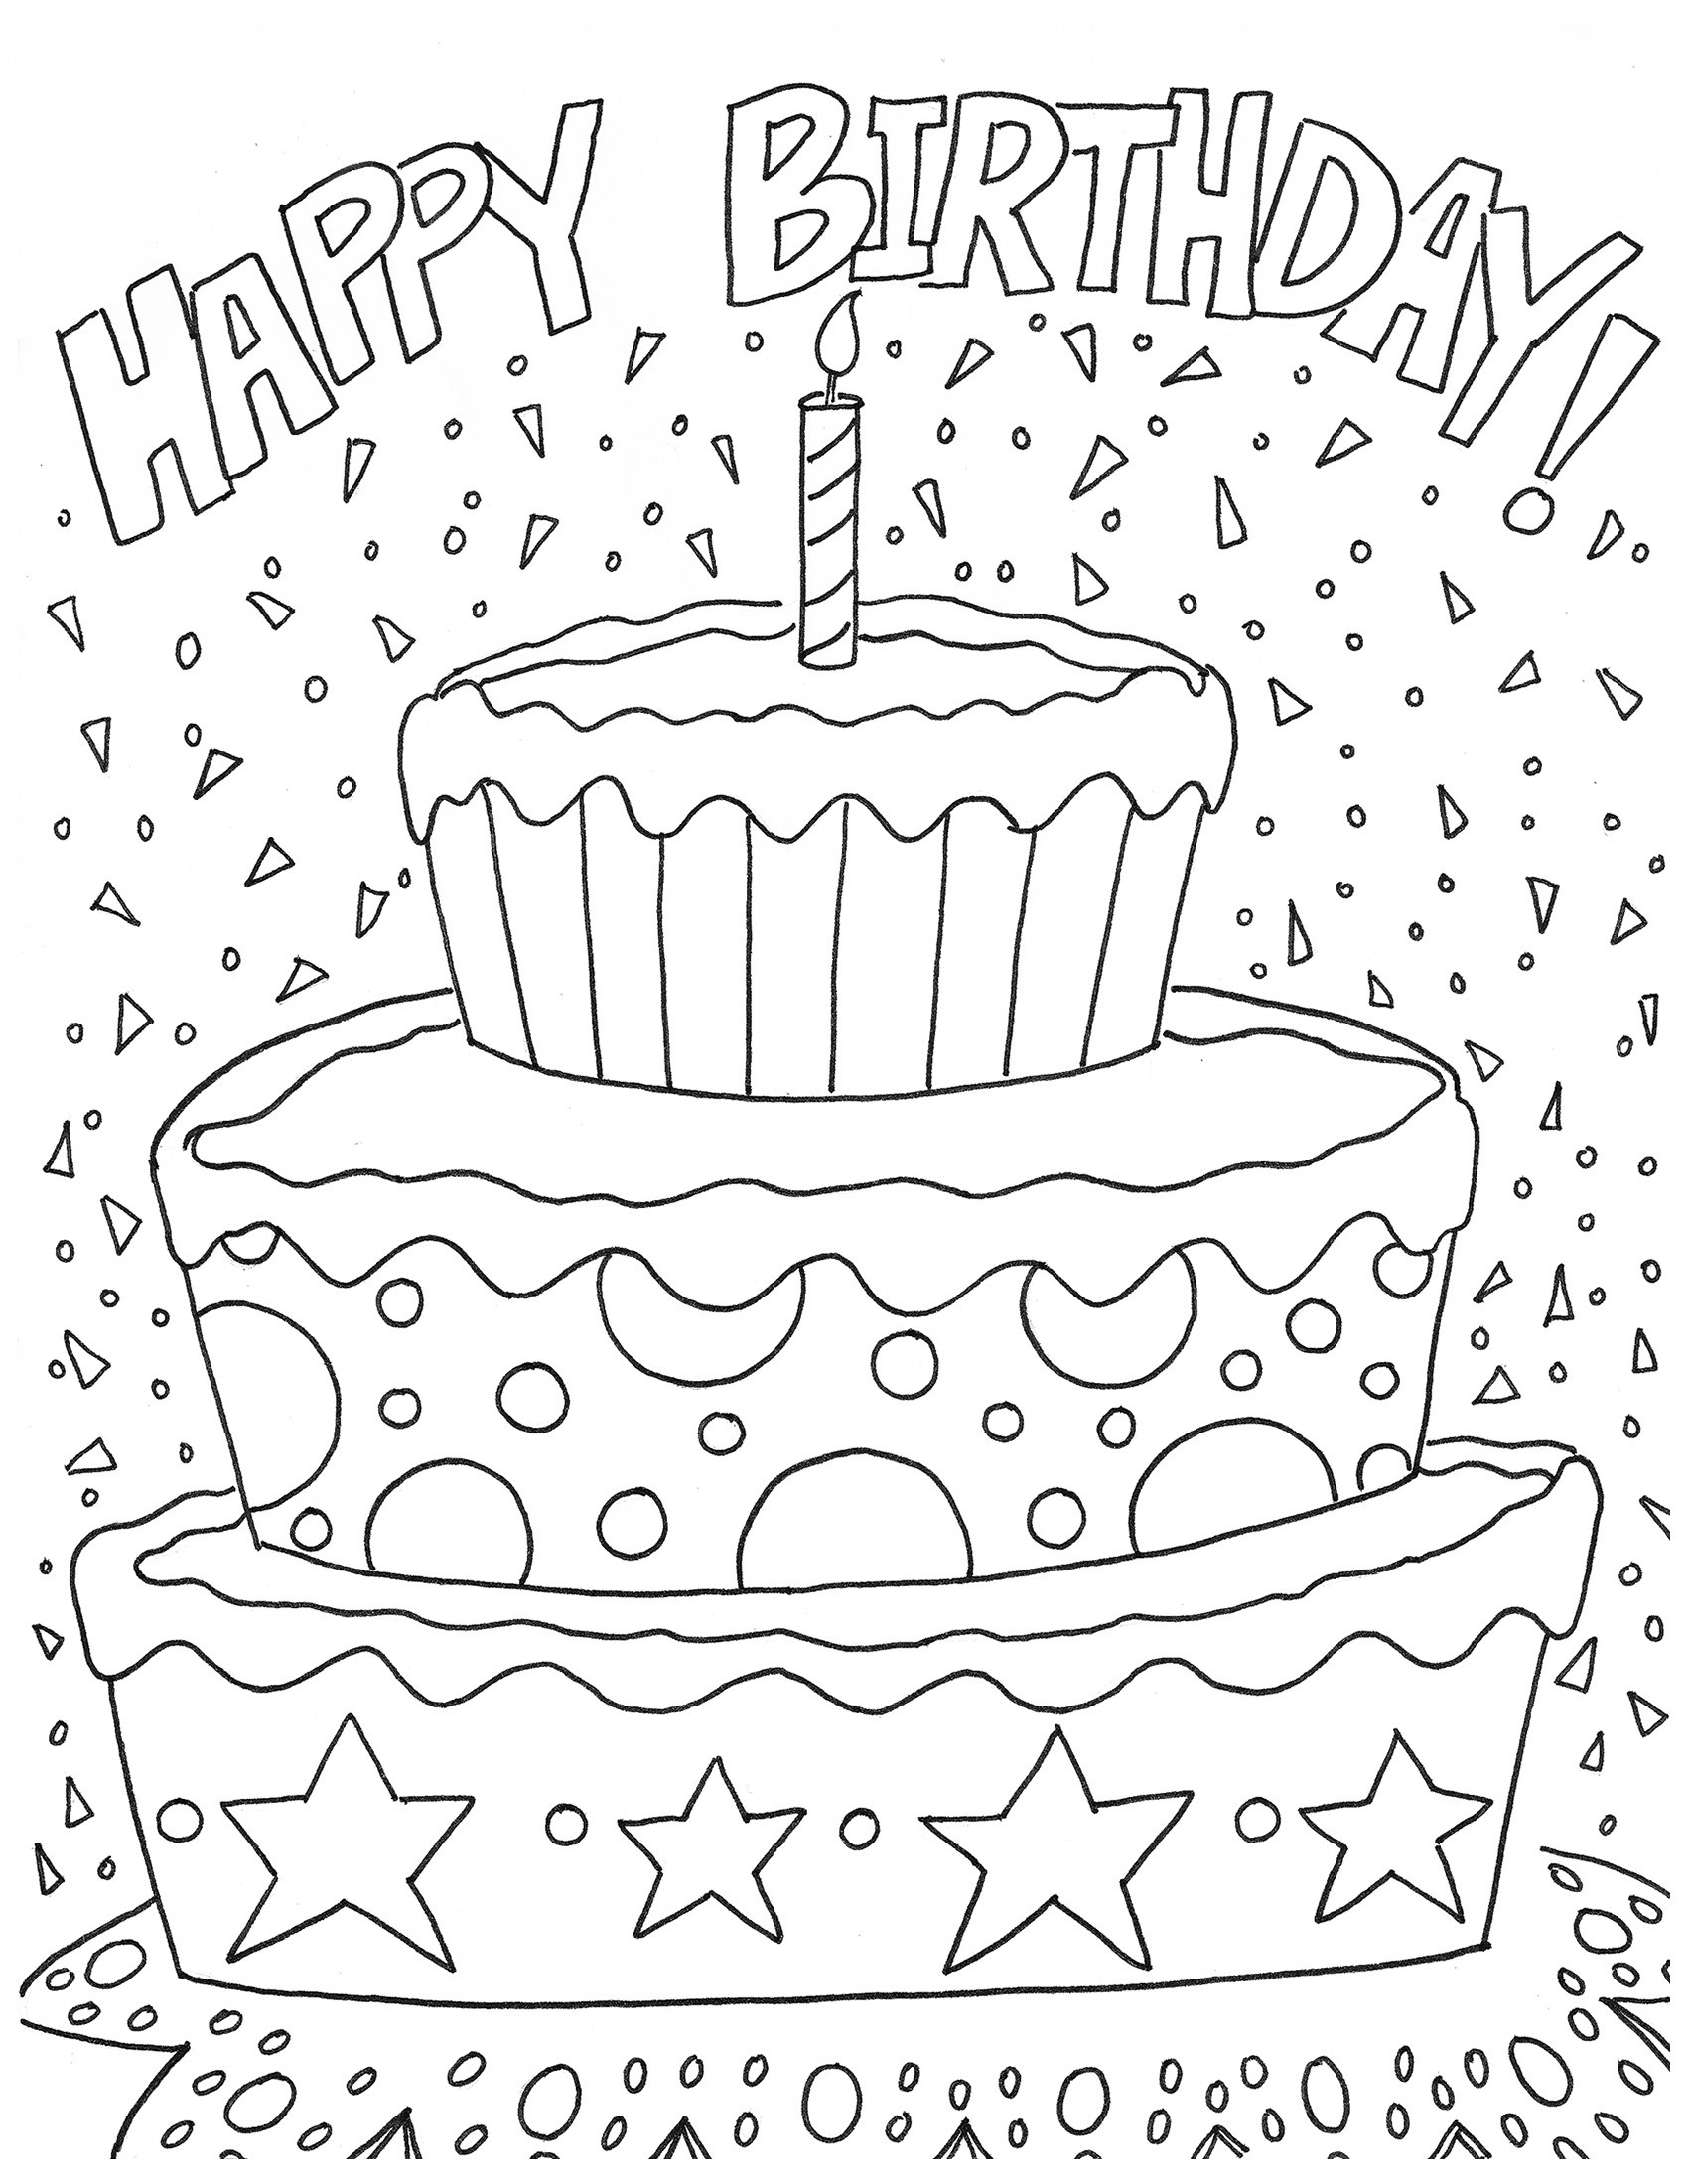 Printable Coloring Birthday Cards
 Free Happy Birthday Coloring Page and Hershey